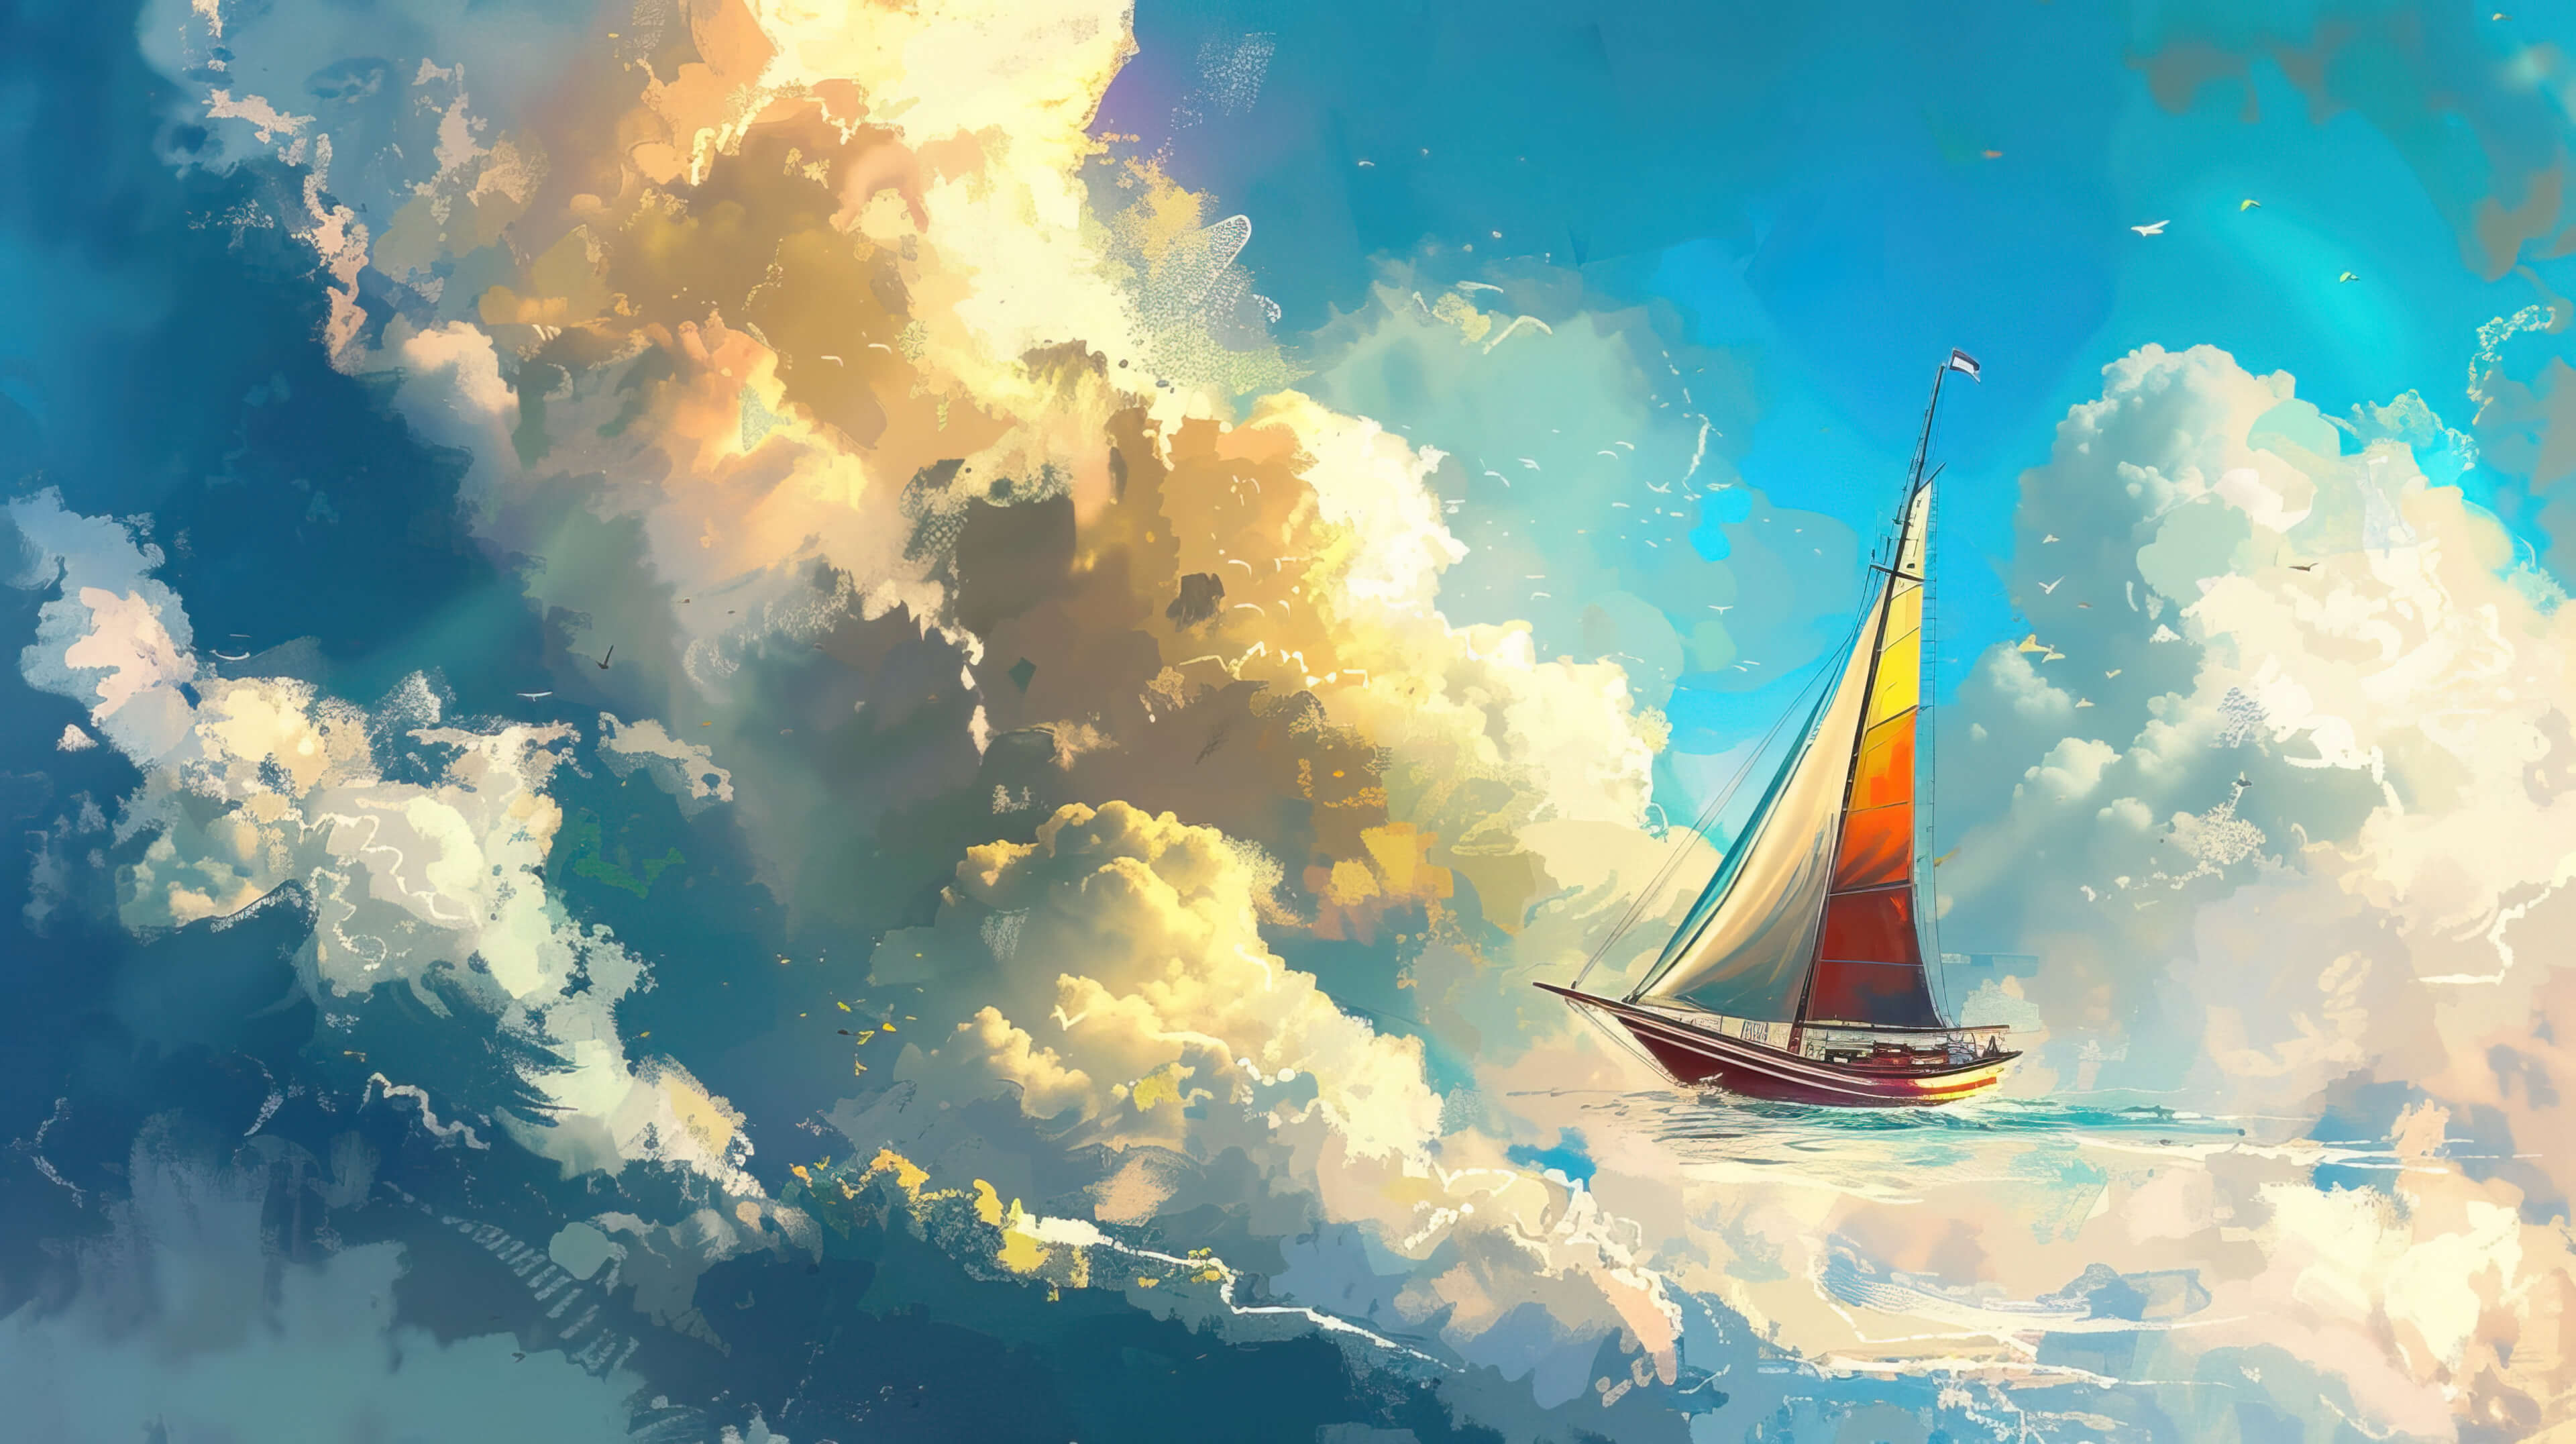 A sailboat with whimsical colorful sails sailing through a sky filled with fluffy clouds adding a touch of magic to the scene can be found in the file named SailingSkyMagic.jpg